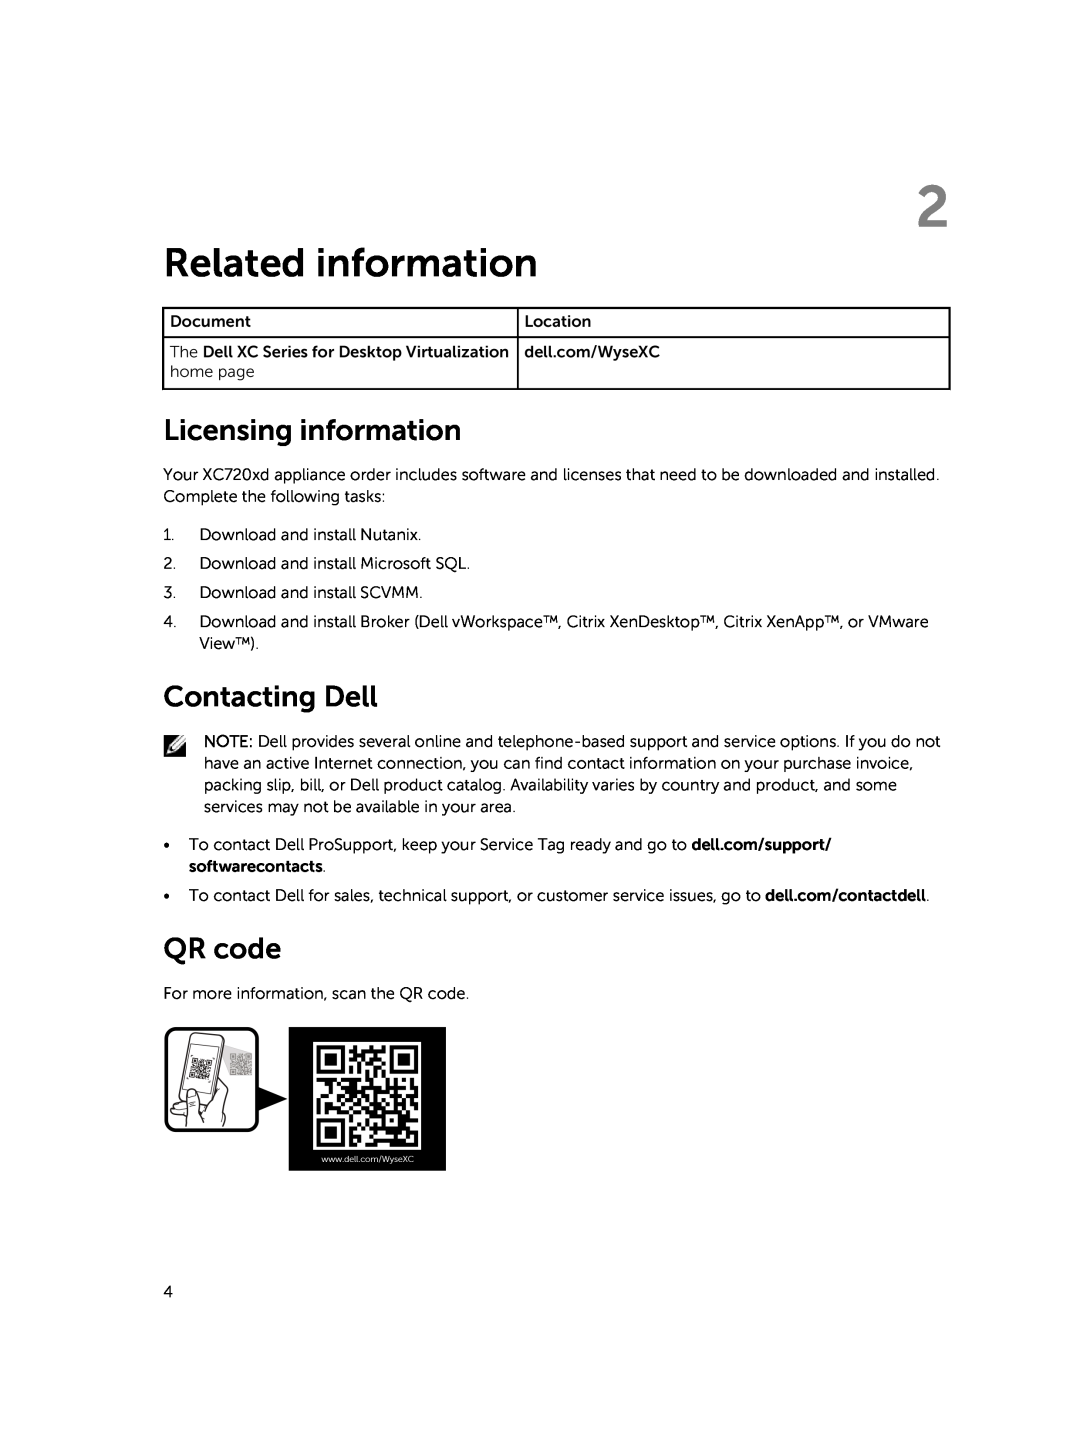 Dell E14S Series manual Related information, Licensing information, Contacting Dell, QR code 